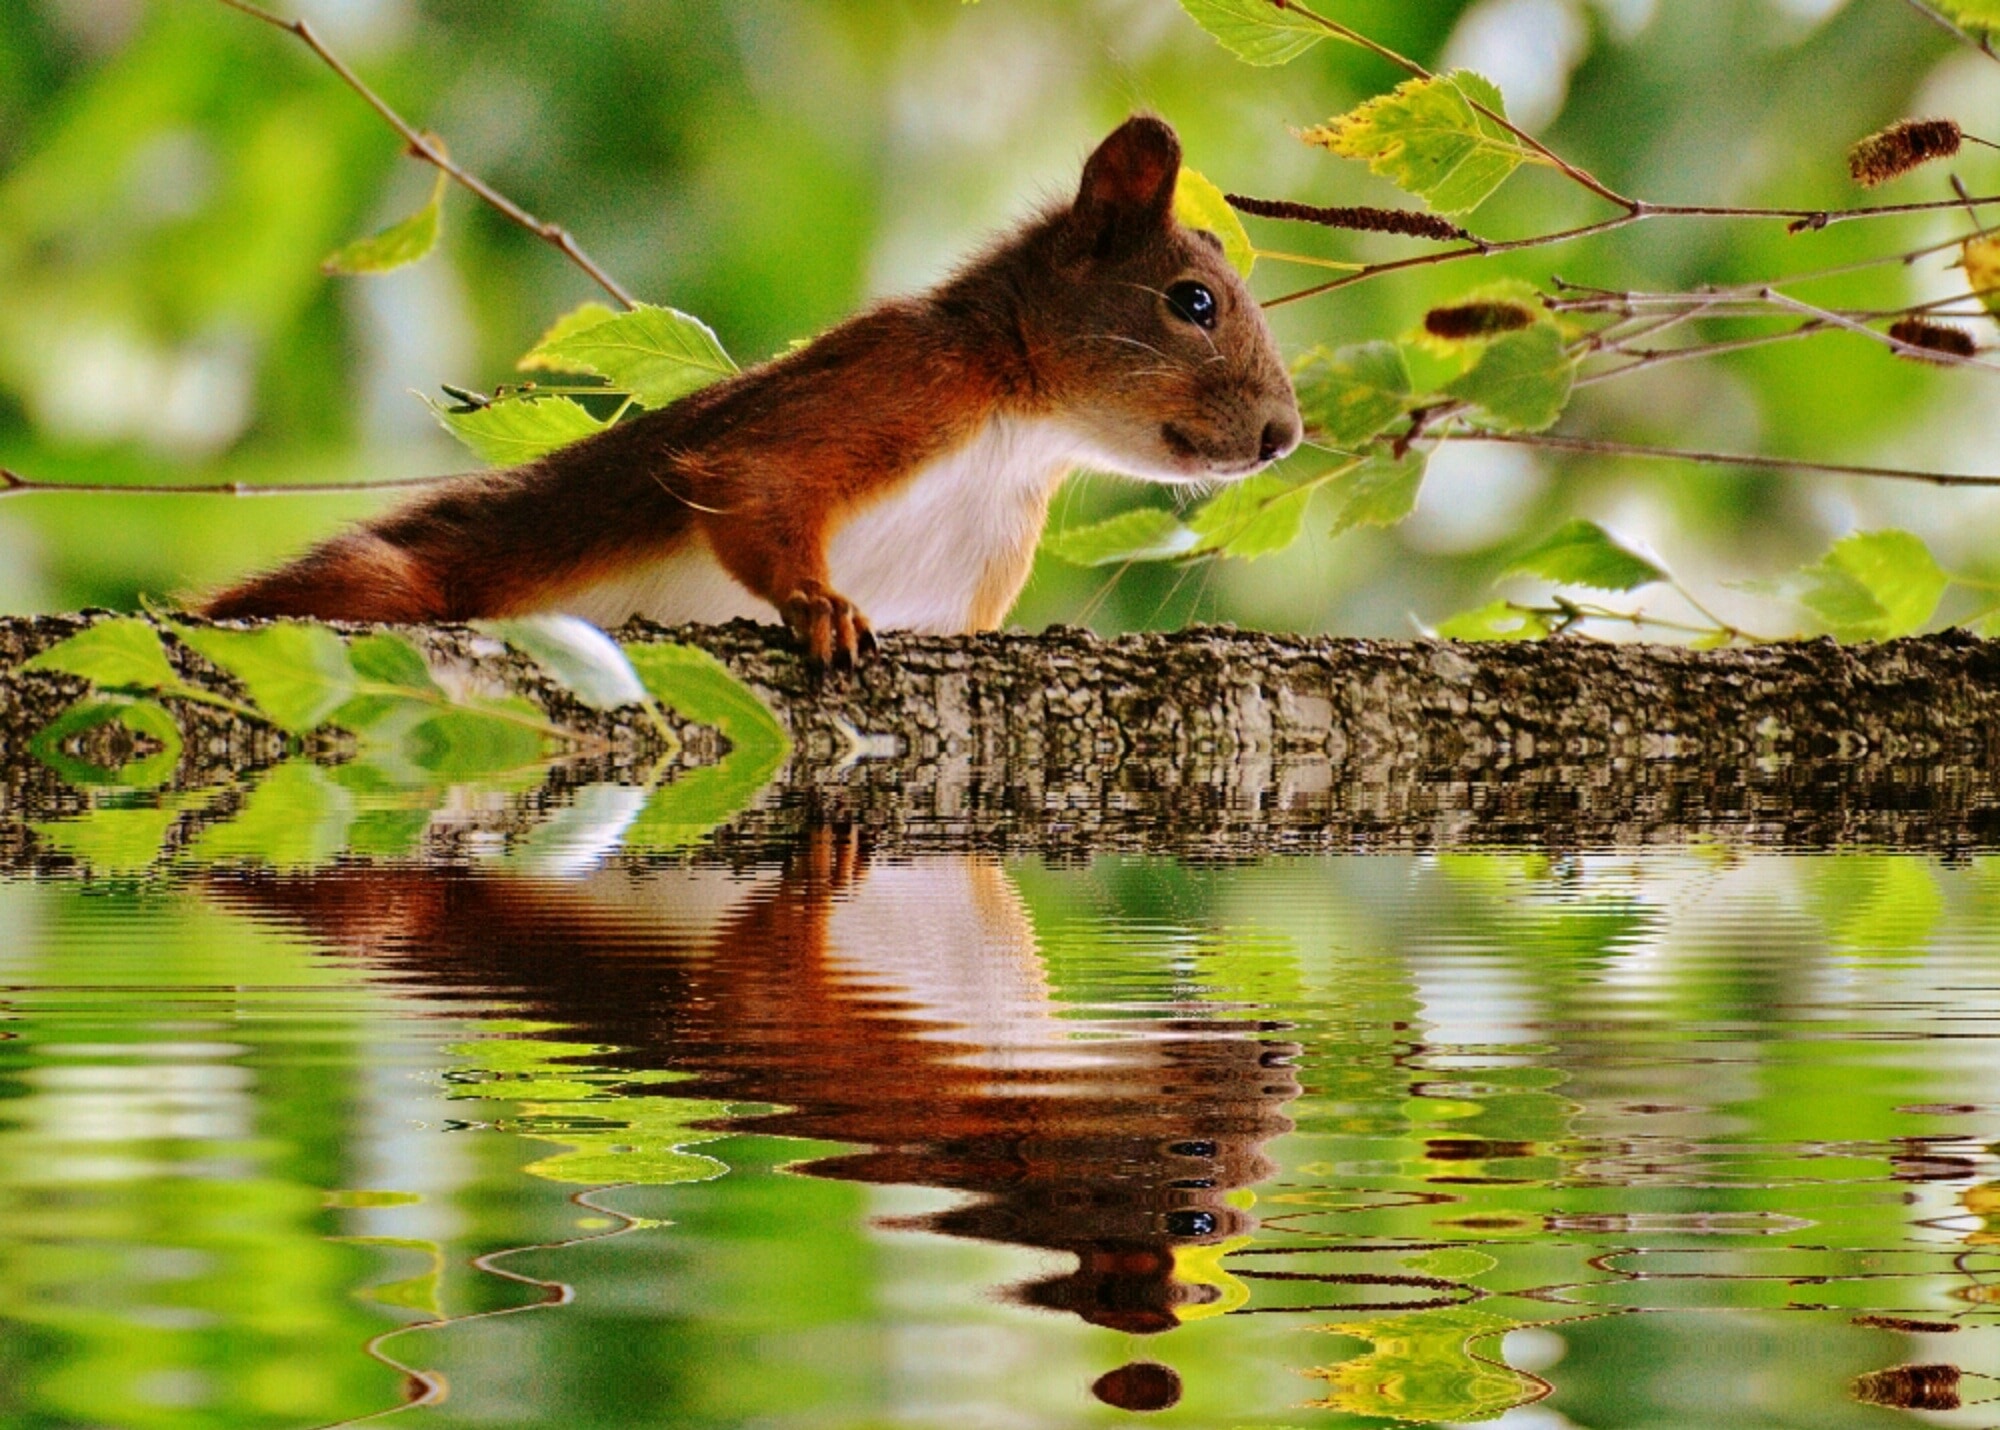 Mirroring, Cute, Water, Nager, Squirrel, one animal, reflection